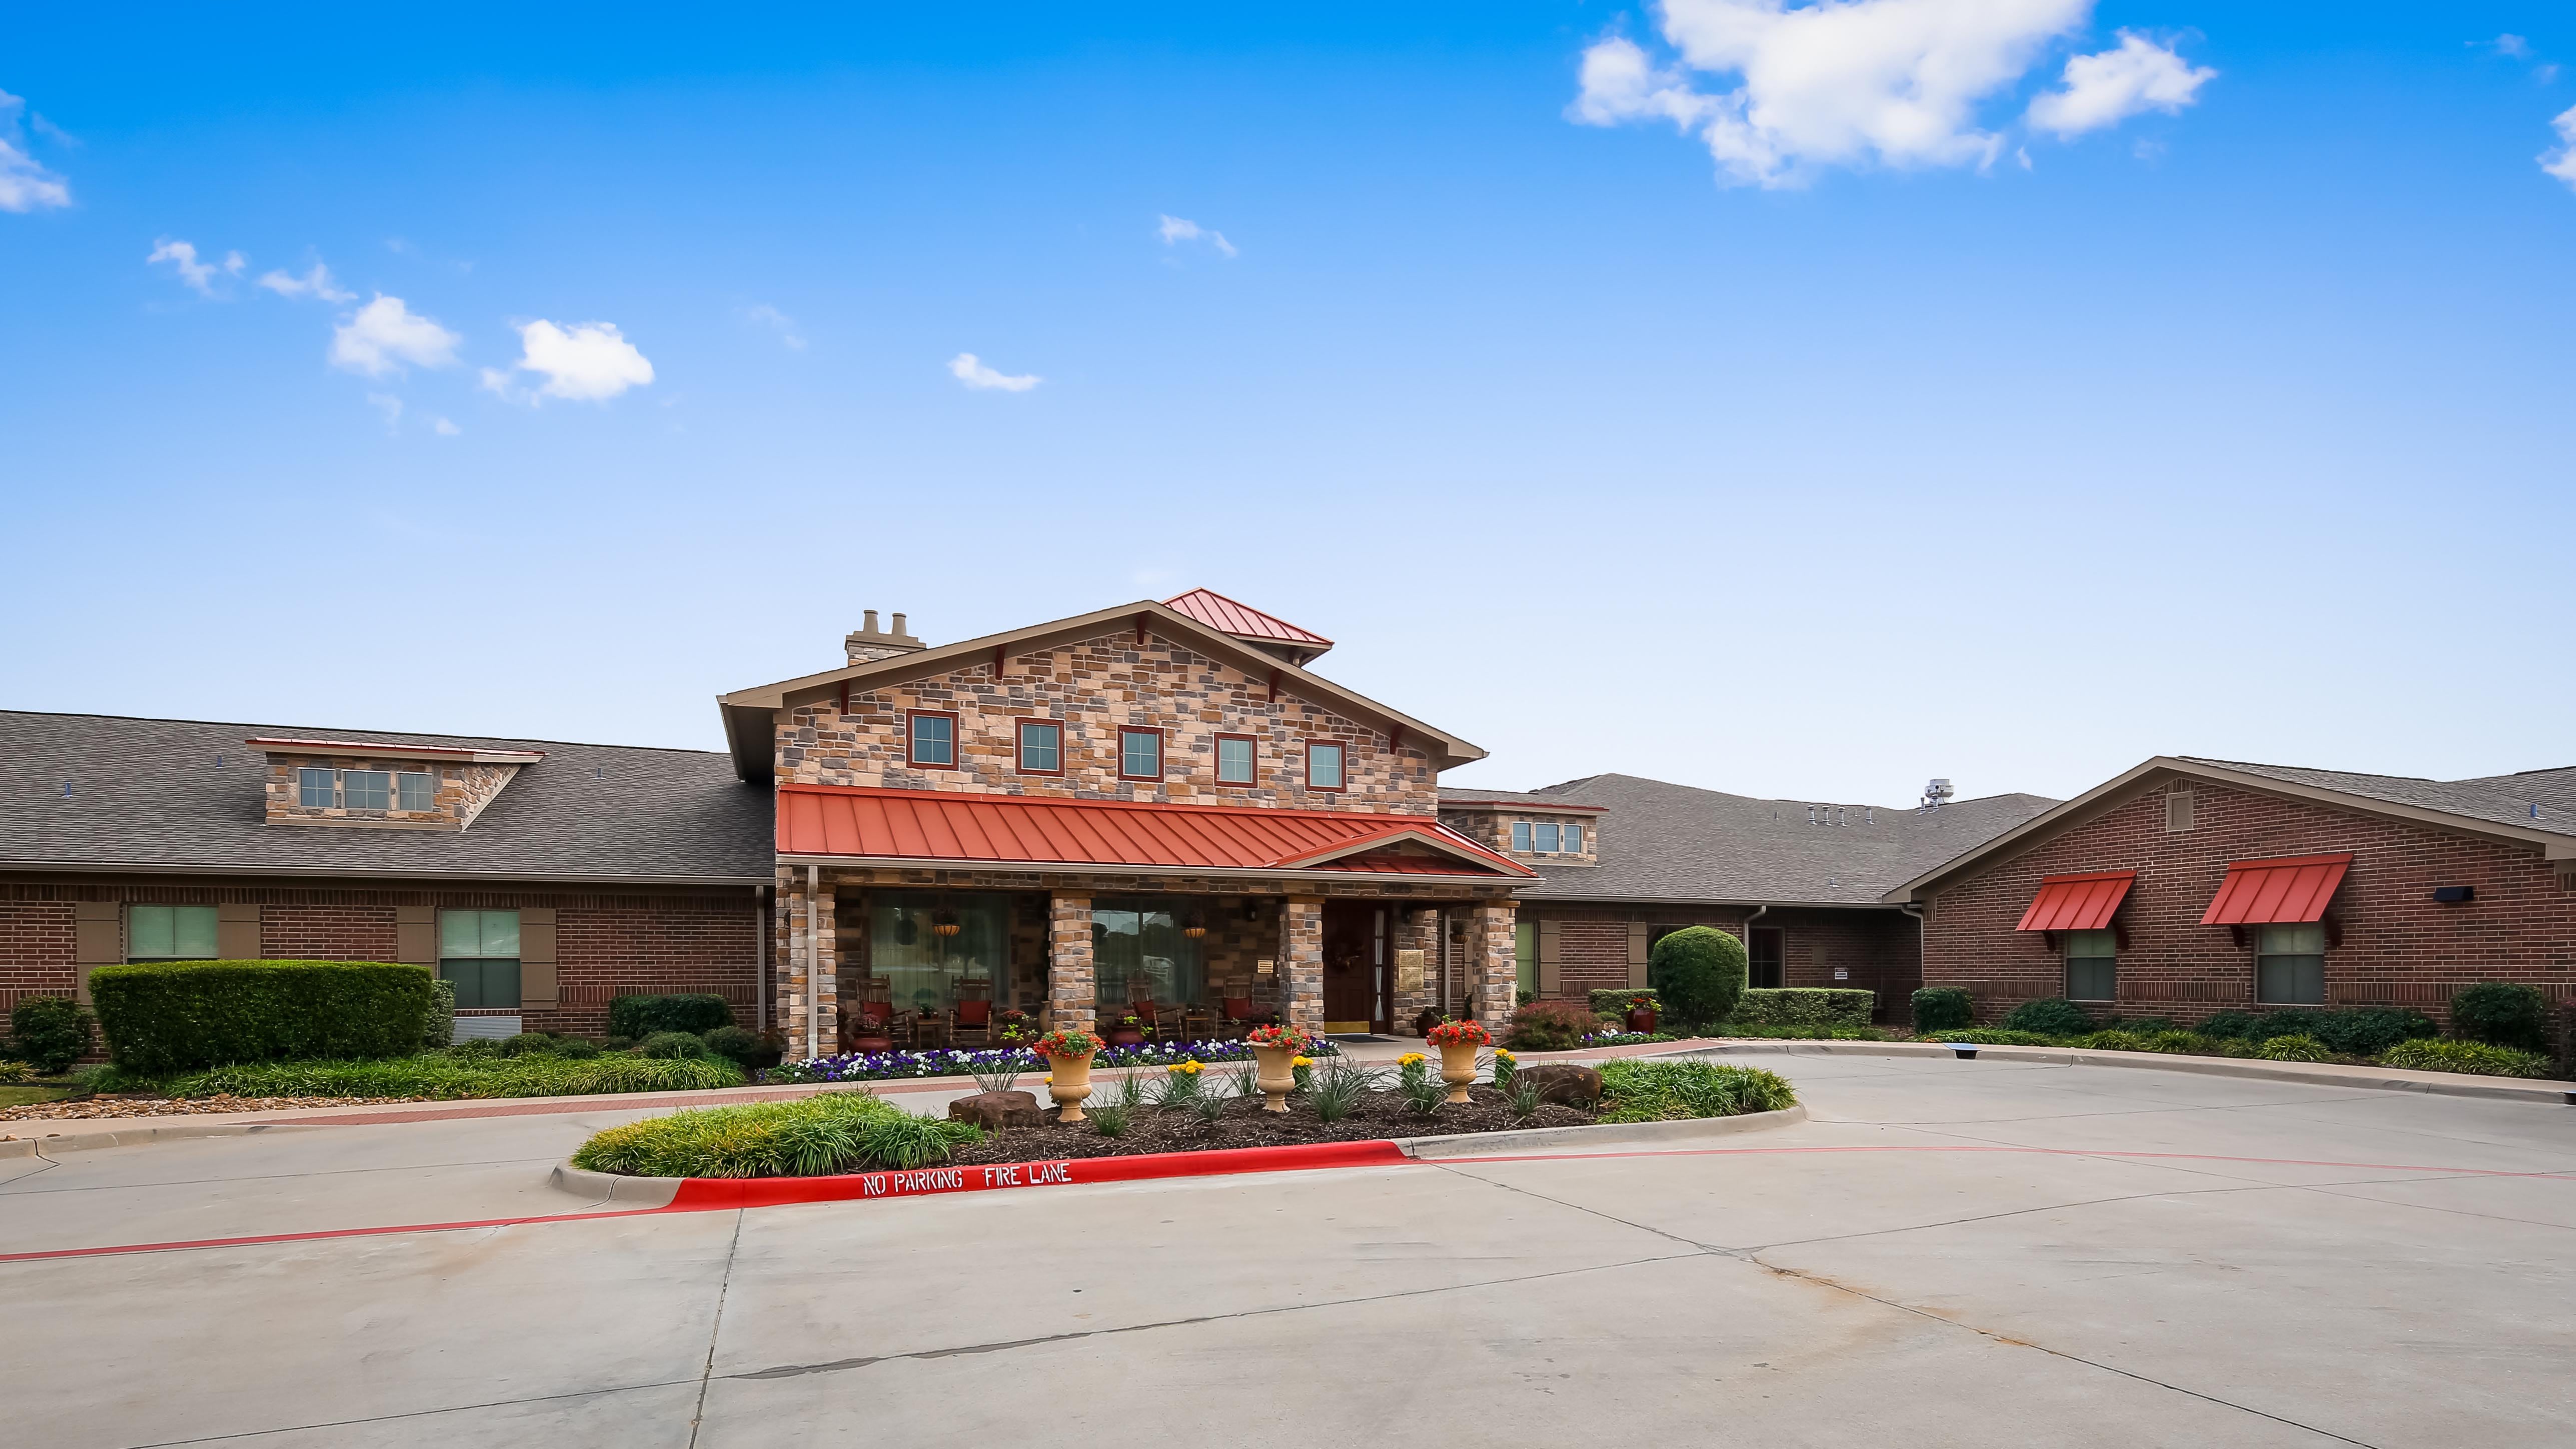 Willow Bend Assisted Living and Memory Care community exterior